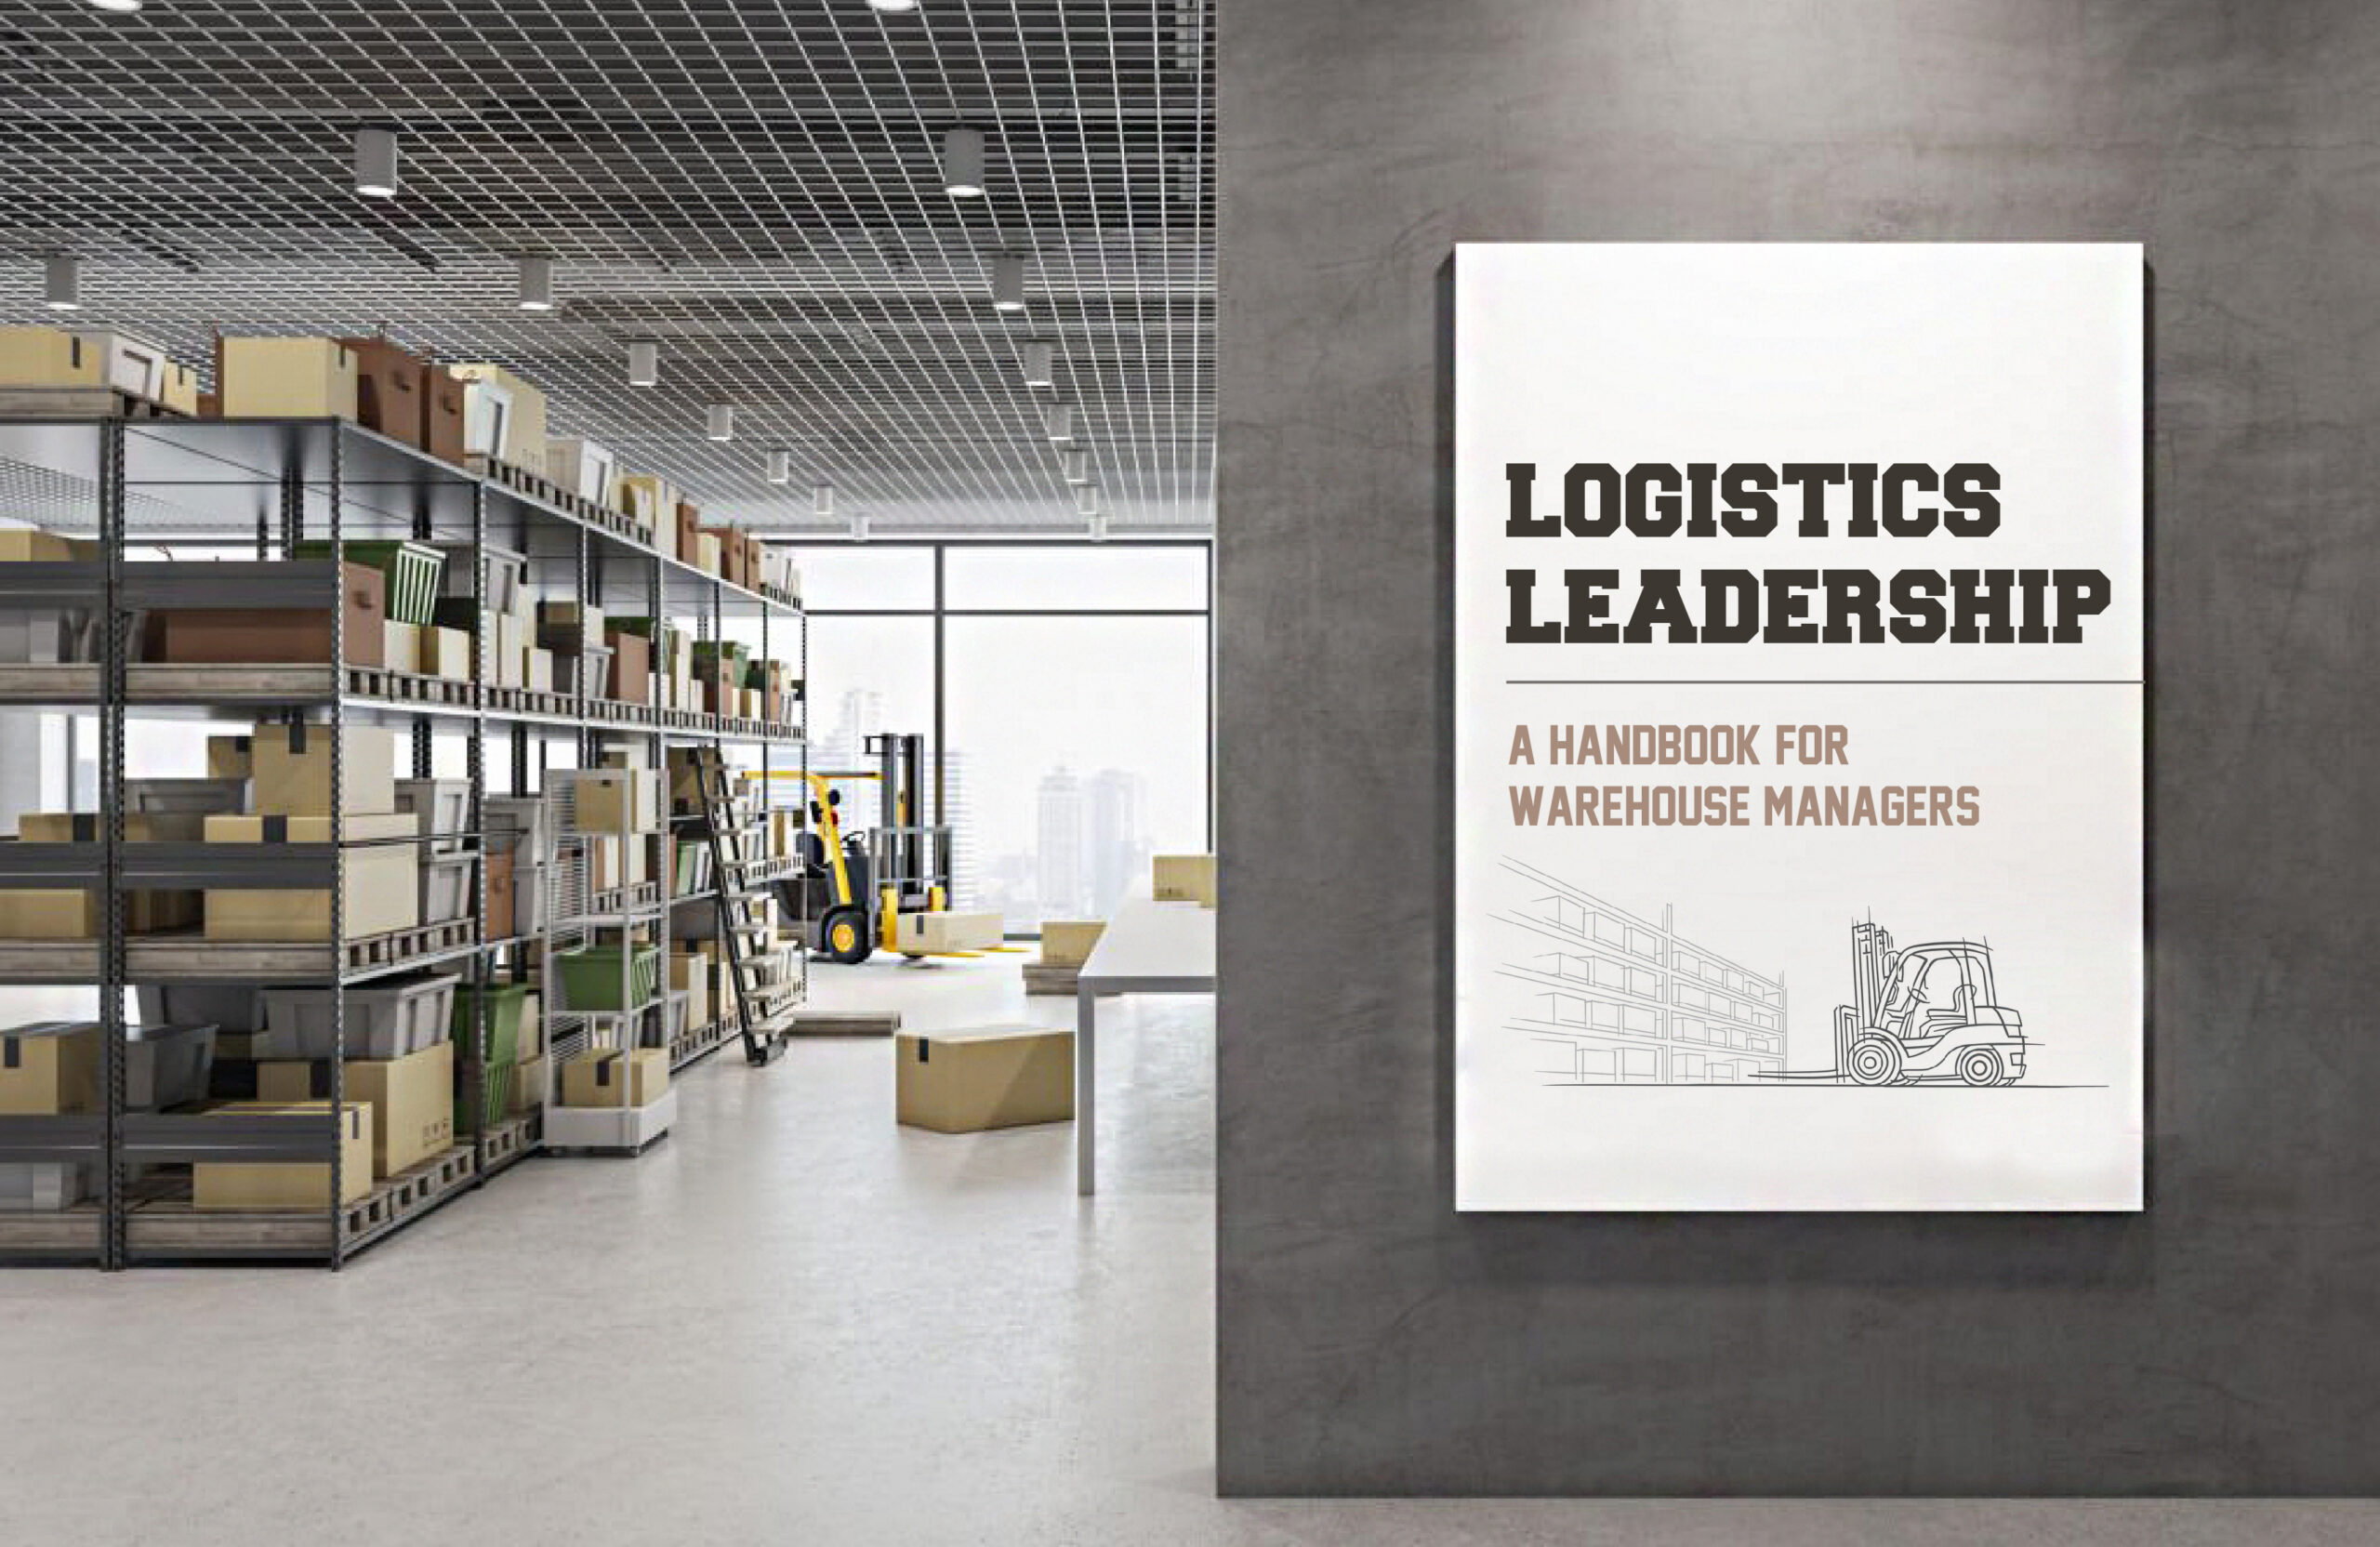 Logistics Leadership: A Handbook for Warehouse Managers